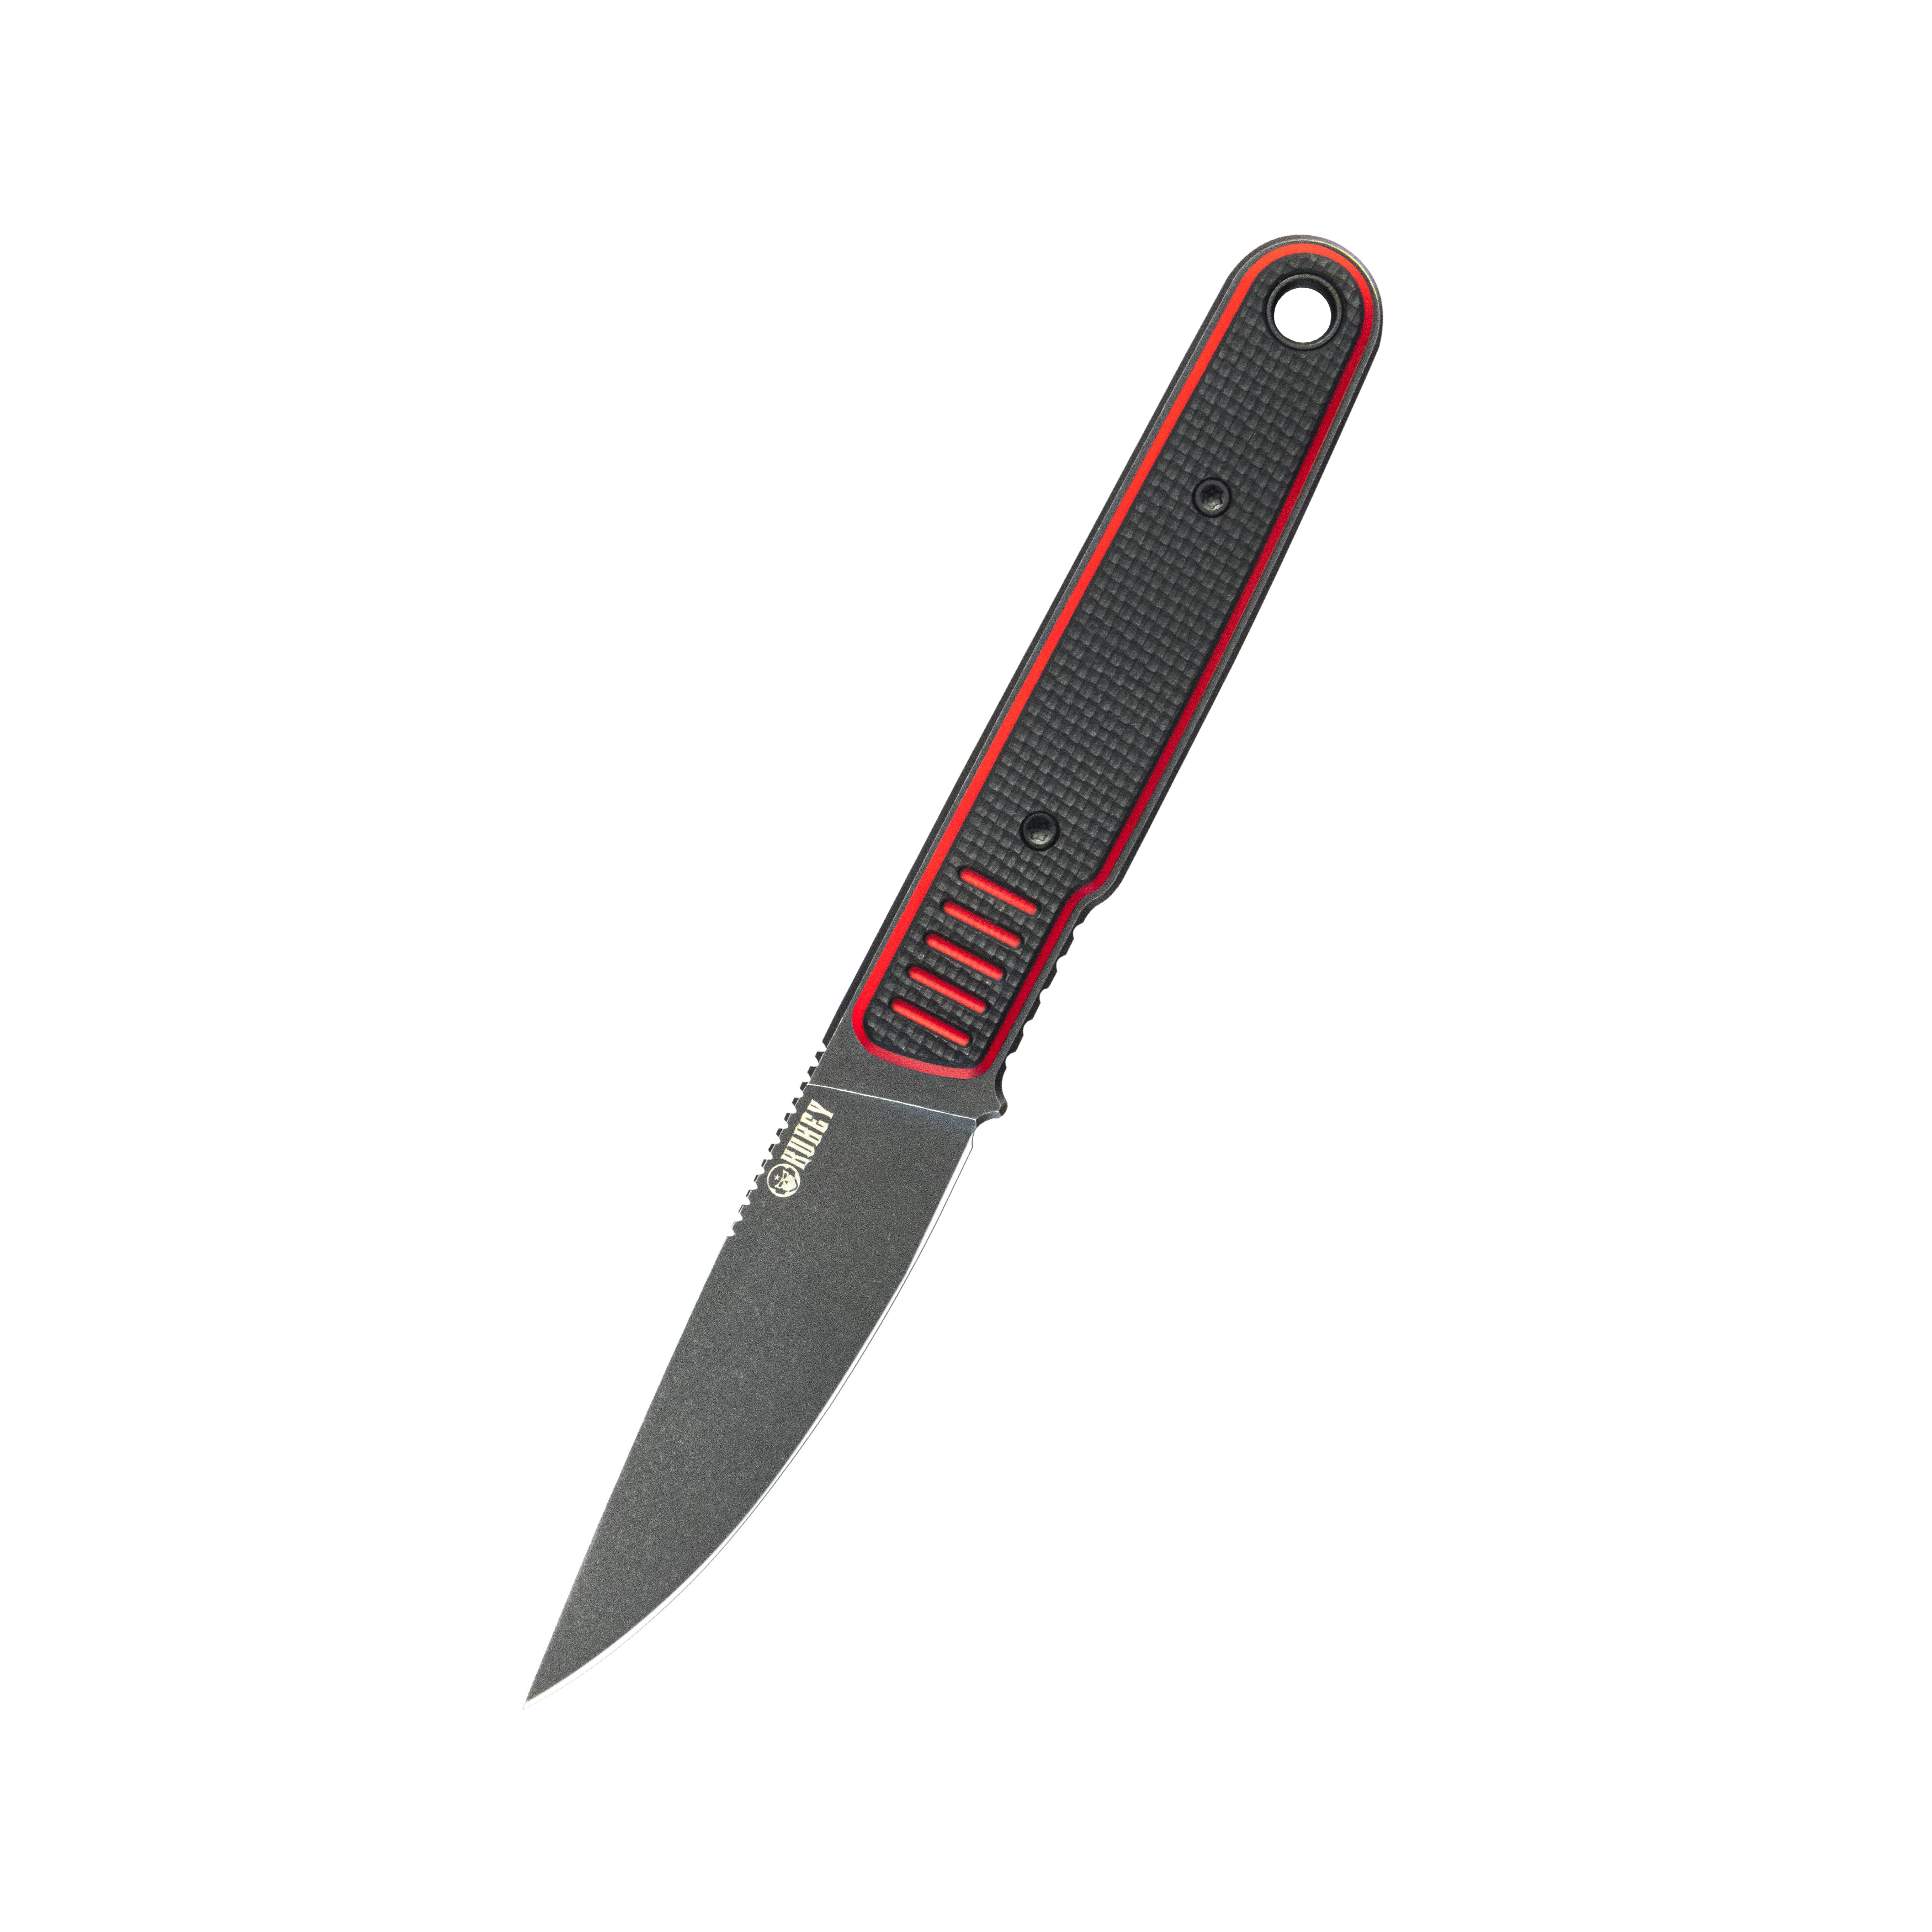 Kubey JL Drop Point Fixie Every Day Carry Fixed Blade Knife Red Black G-10 3.11'' Drop Point Blackwash 14C28N KU356A